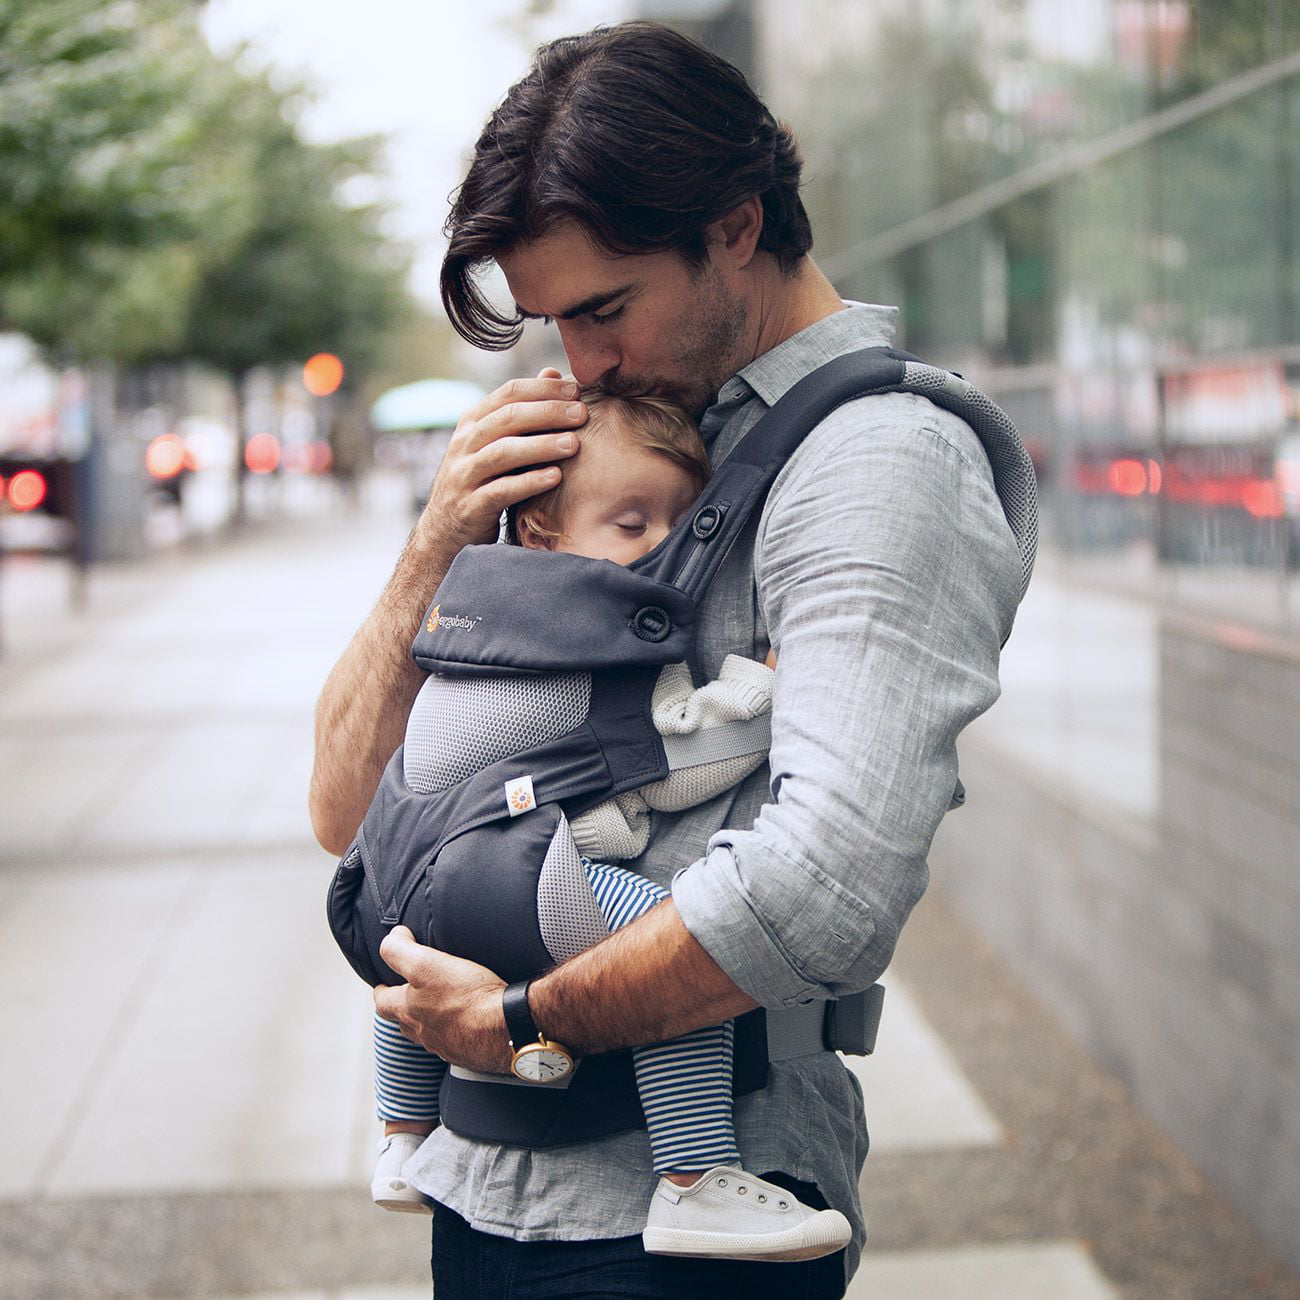 ergobaby four position 360 baby carrier